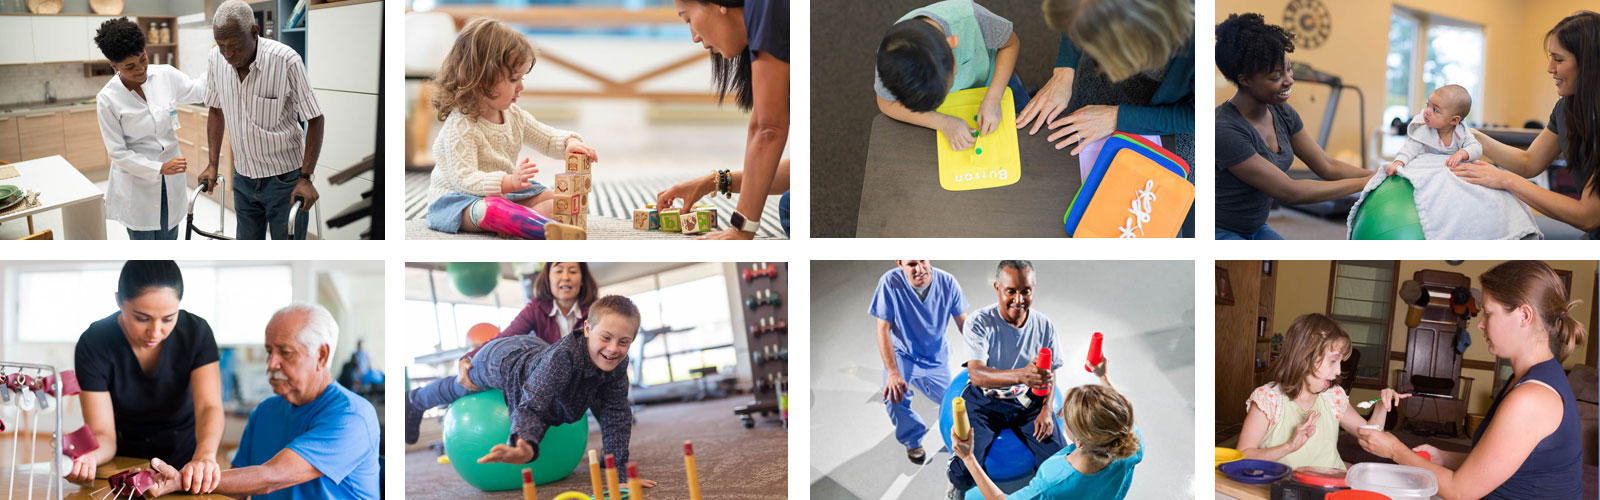 A variety of images showing work done by occupational therapists